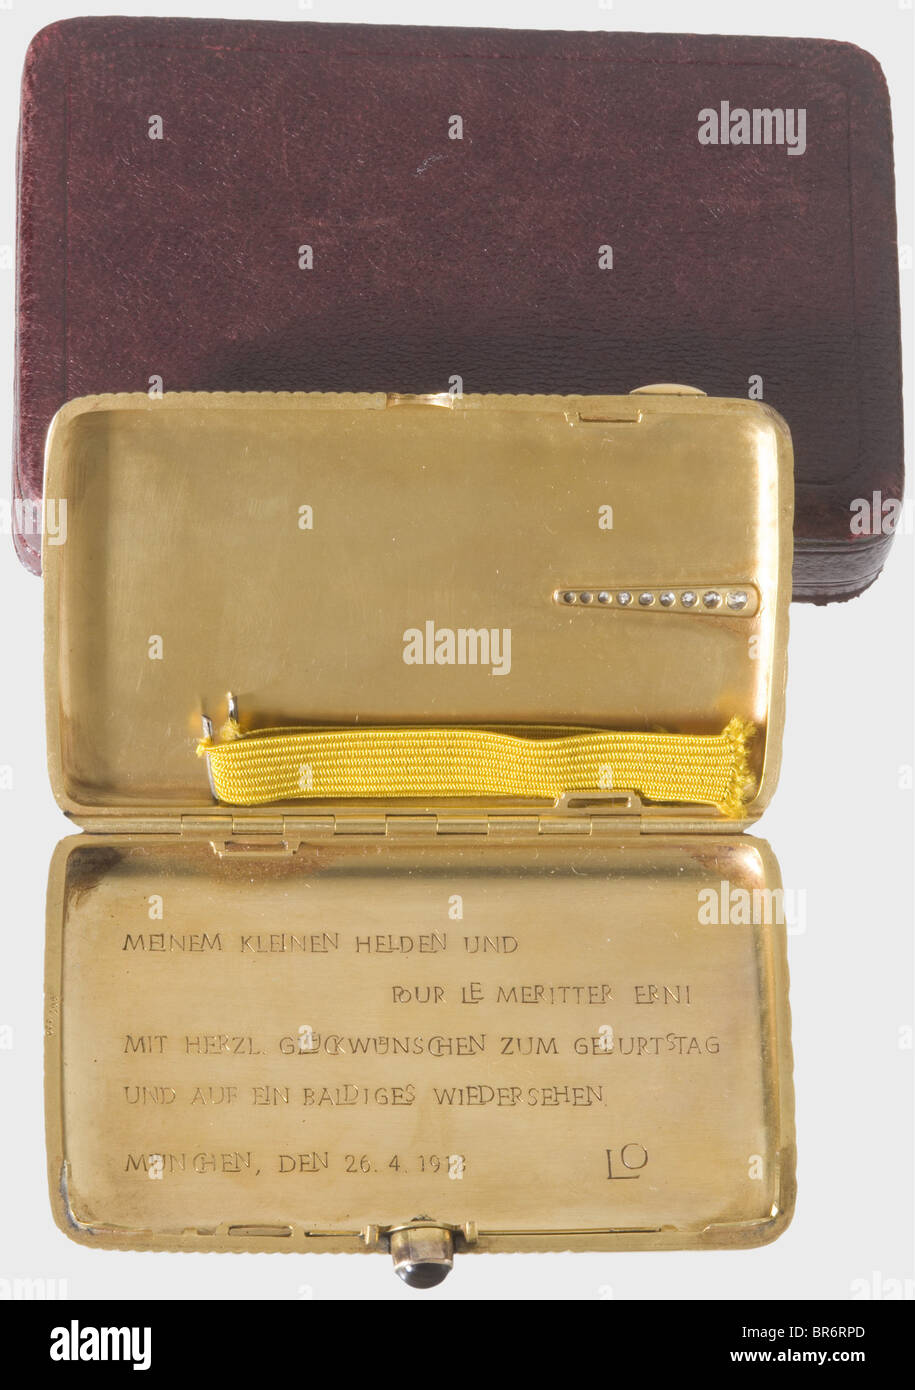 Ernst Udet (1896 - 1941) - a golden cigarette case and a photograph charm with a Pour le mérite-miniature, of his girlfriend Eleanor 'Lo' Zink as gifts for his 22nd birthday and for the Pour le mérite conferment in 1918. A case from the Jugendstil epoch from jeweller M. P. Wetzlar in Munich with corrugated surfaces and nine diamonds set on the lid. Engraved inscription inside 'Meinem kleinen Helden und Pour historic, historical, 1910s, 20th century, troop, troops, armed forces, military, militaria, army, wing, group, air force, air forces, object, objects, stil, Stock Photo